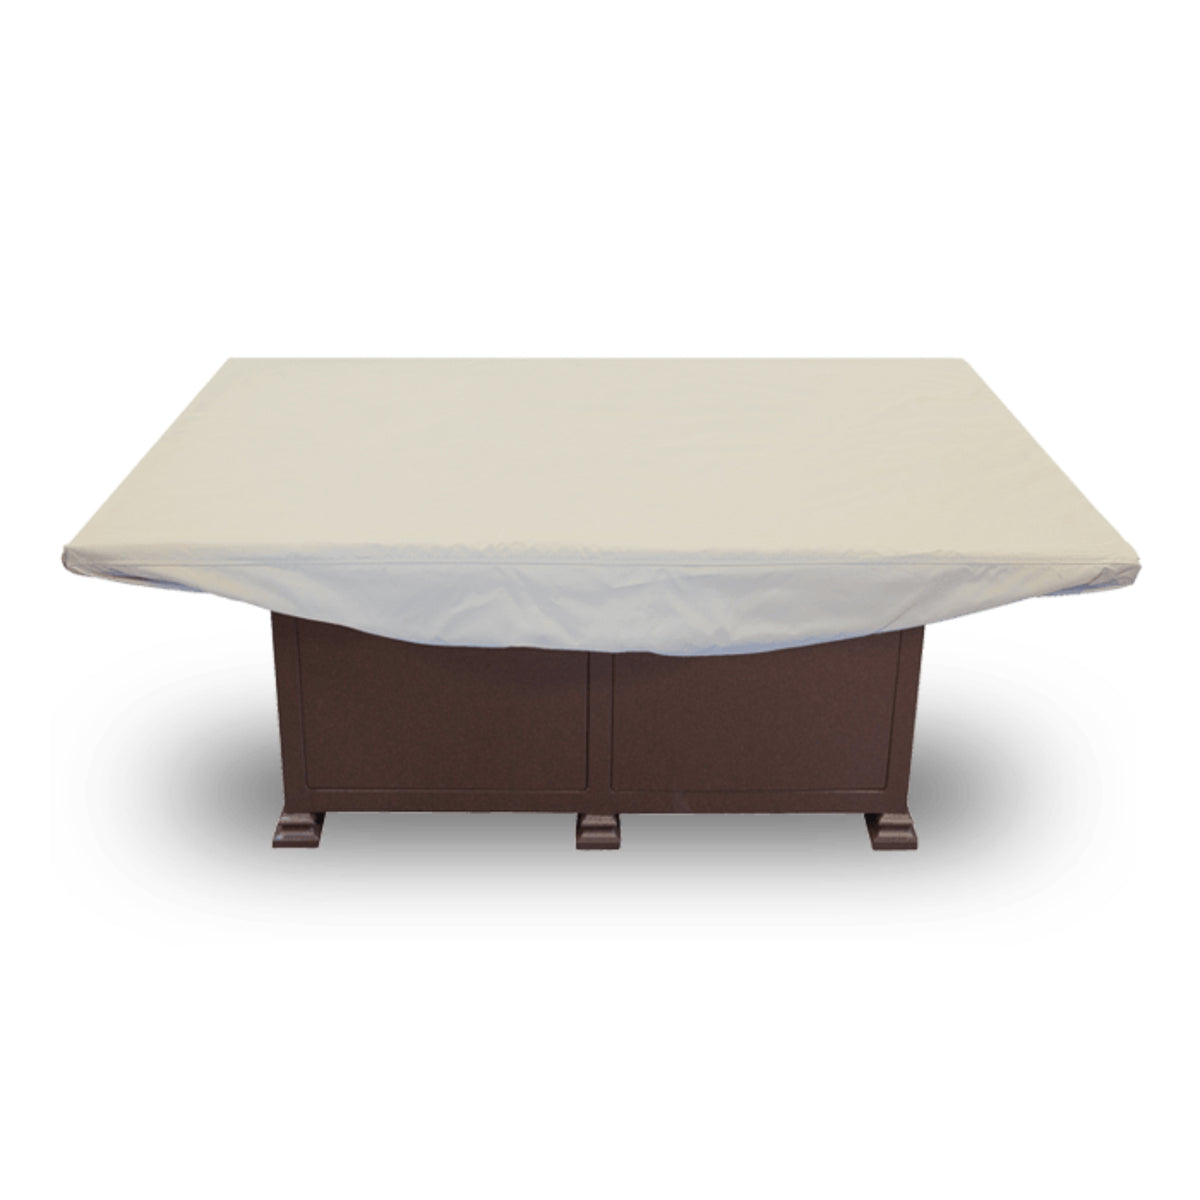 Extra Large Rectangular Fire Pit/Table Cover